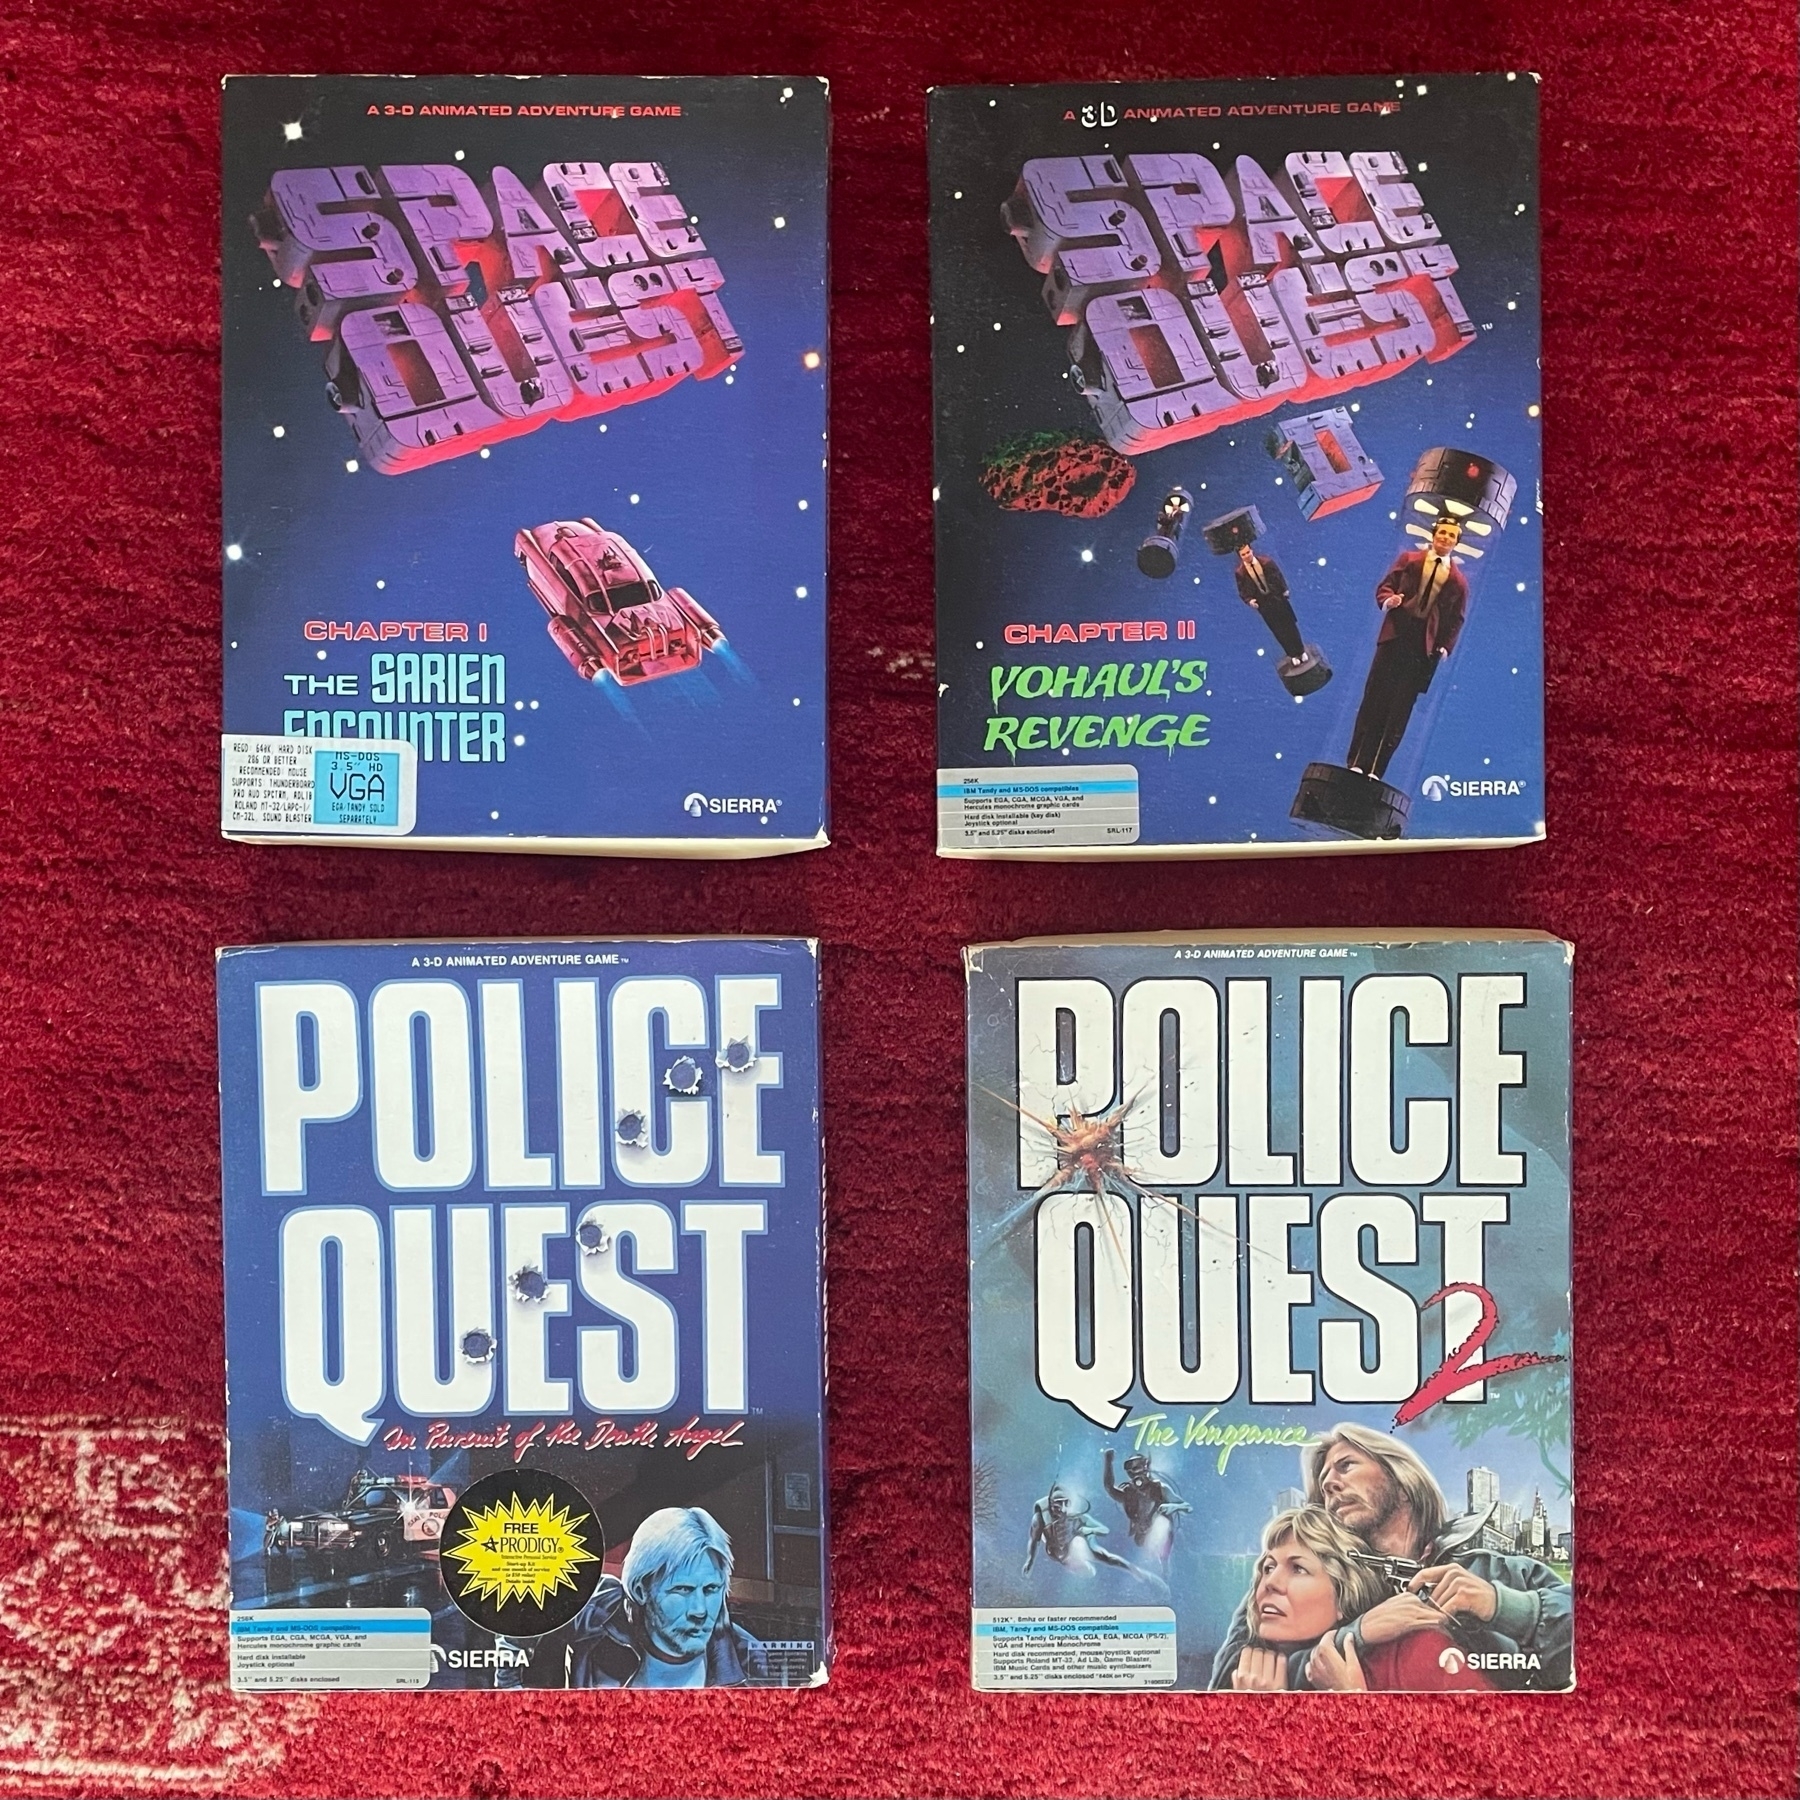 Space Quest, games 1 and 2. Police Quest, games 1 and 2. 